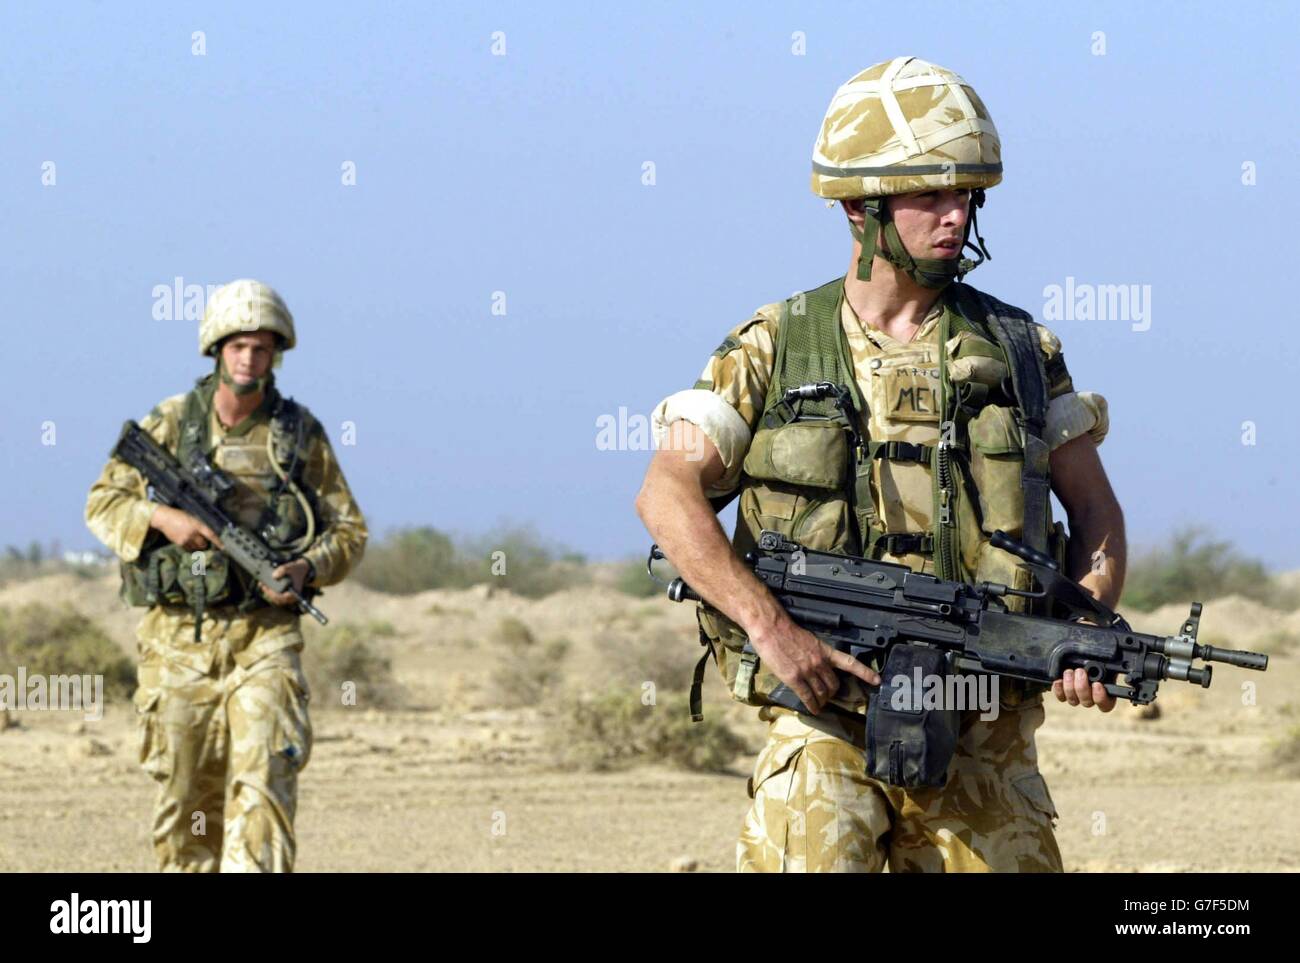 OVERSEAS USE ONLY: Soldiers from the Black Watch Battle group, cover ground near their foward operating base "Springfield" on the east bank of the Euphrates river, 25 miles south of Baghdad. A Black Watch soldier was injured today in a mortar attack on the Camp Dogwood base, the Ministry of Defence confirmed today. The MoD said the injuries were not thought to be life-threatening. "A mortar landed inside the compound earlier today, injuring a soldier," said a spokesman. "We do not believe the soldier has life-threatening injuries." Stock Photo